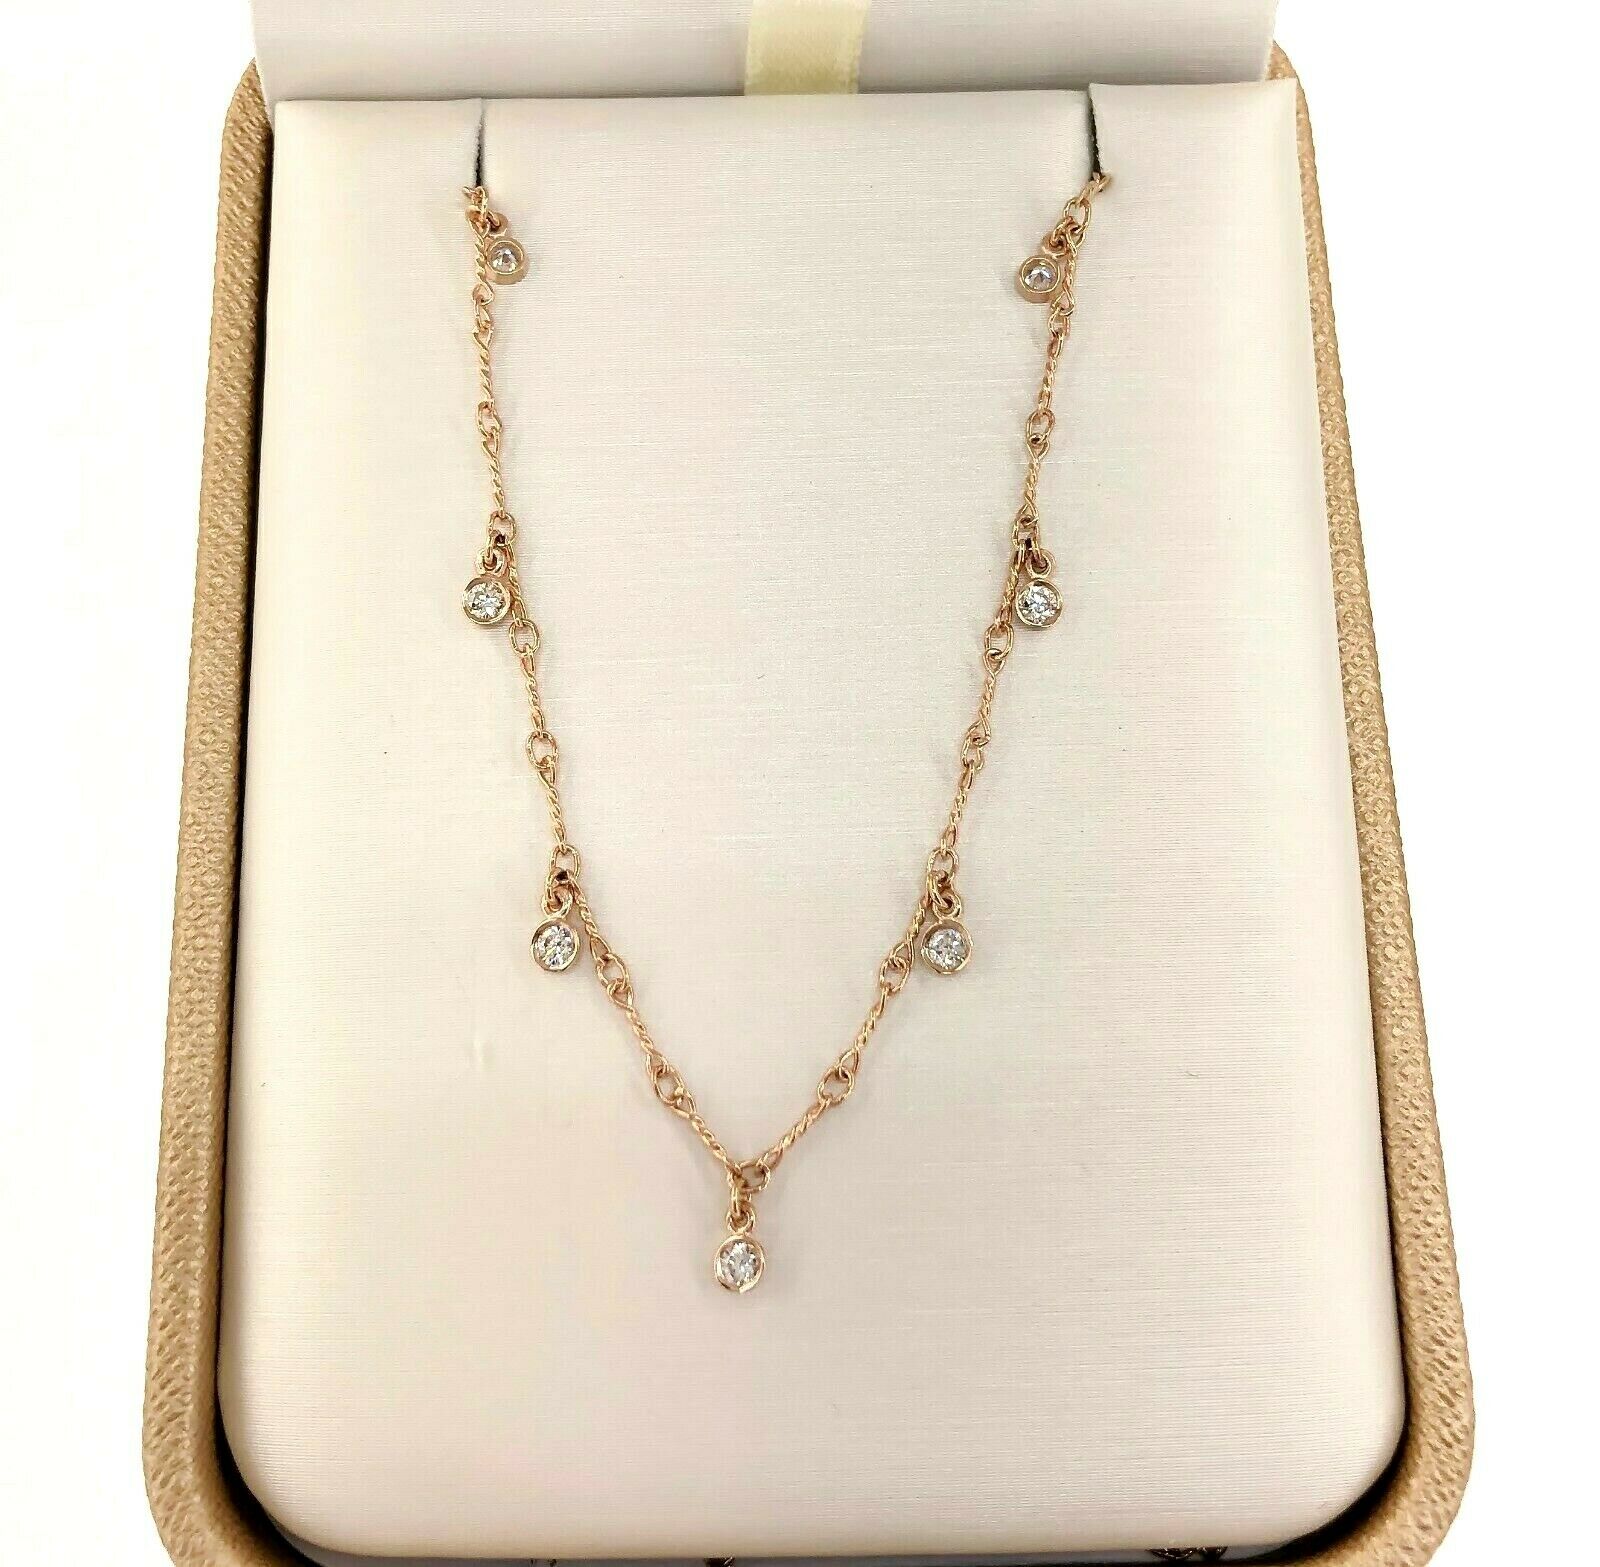 0.38 Carats t.w. Hand Assembled Dangling Diamond by The Yard Necklace Chain 14K